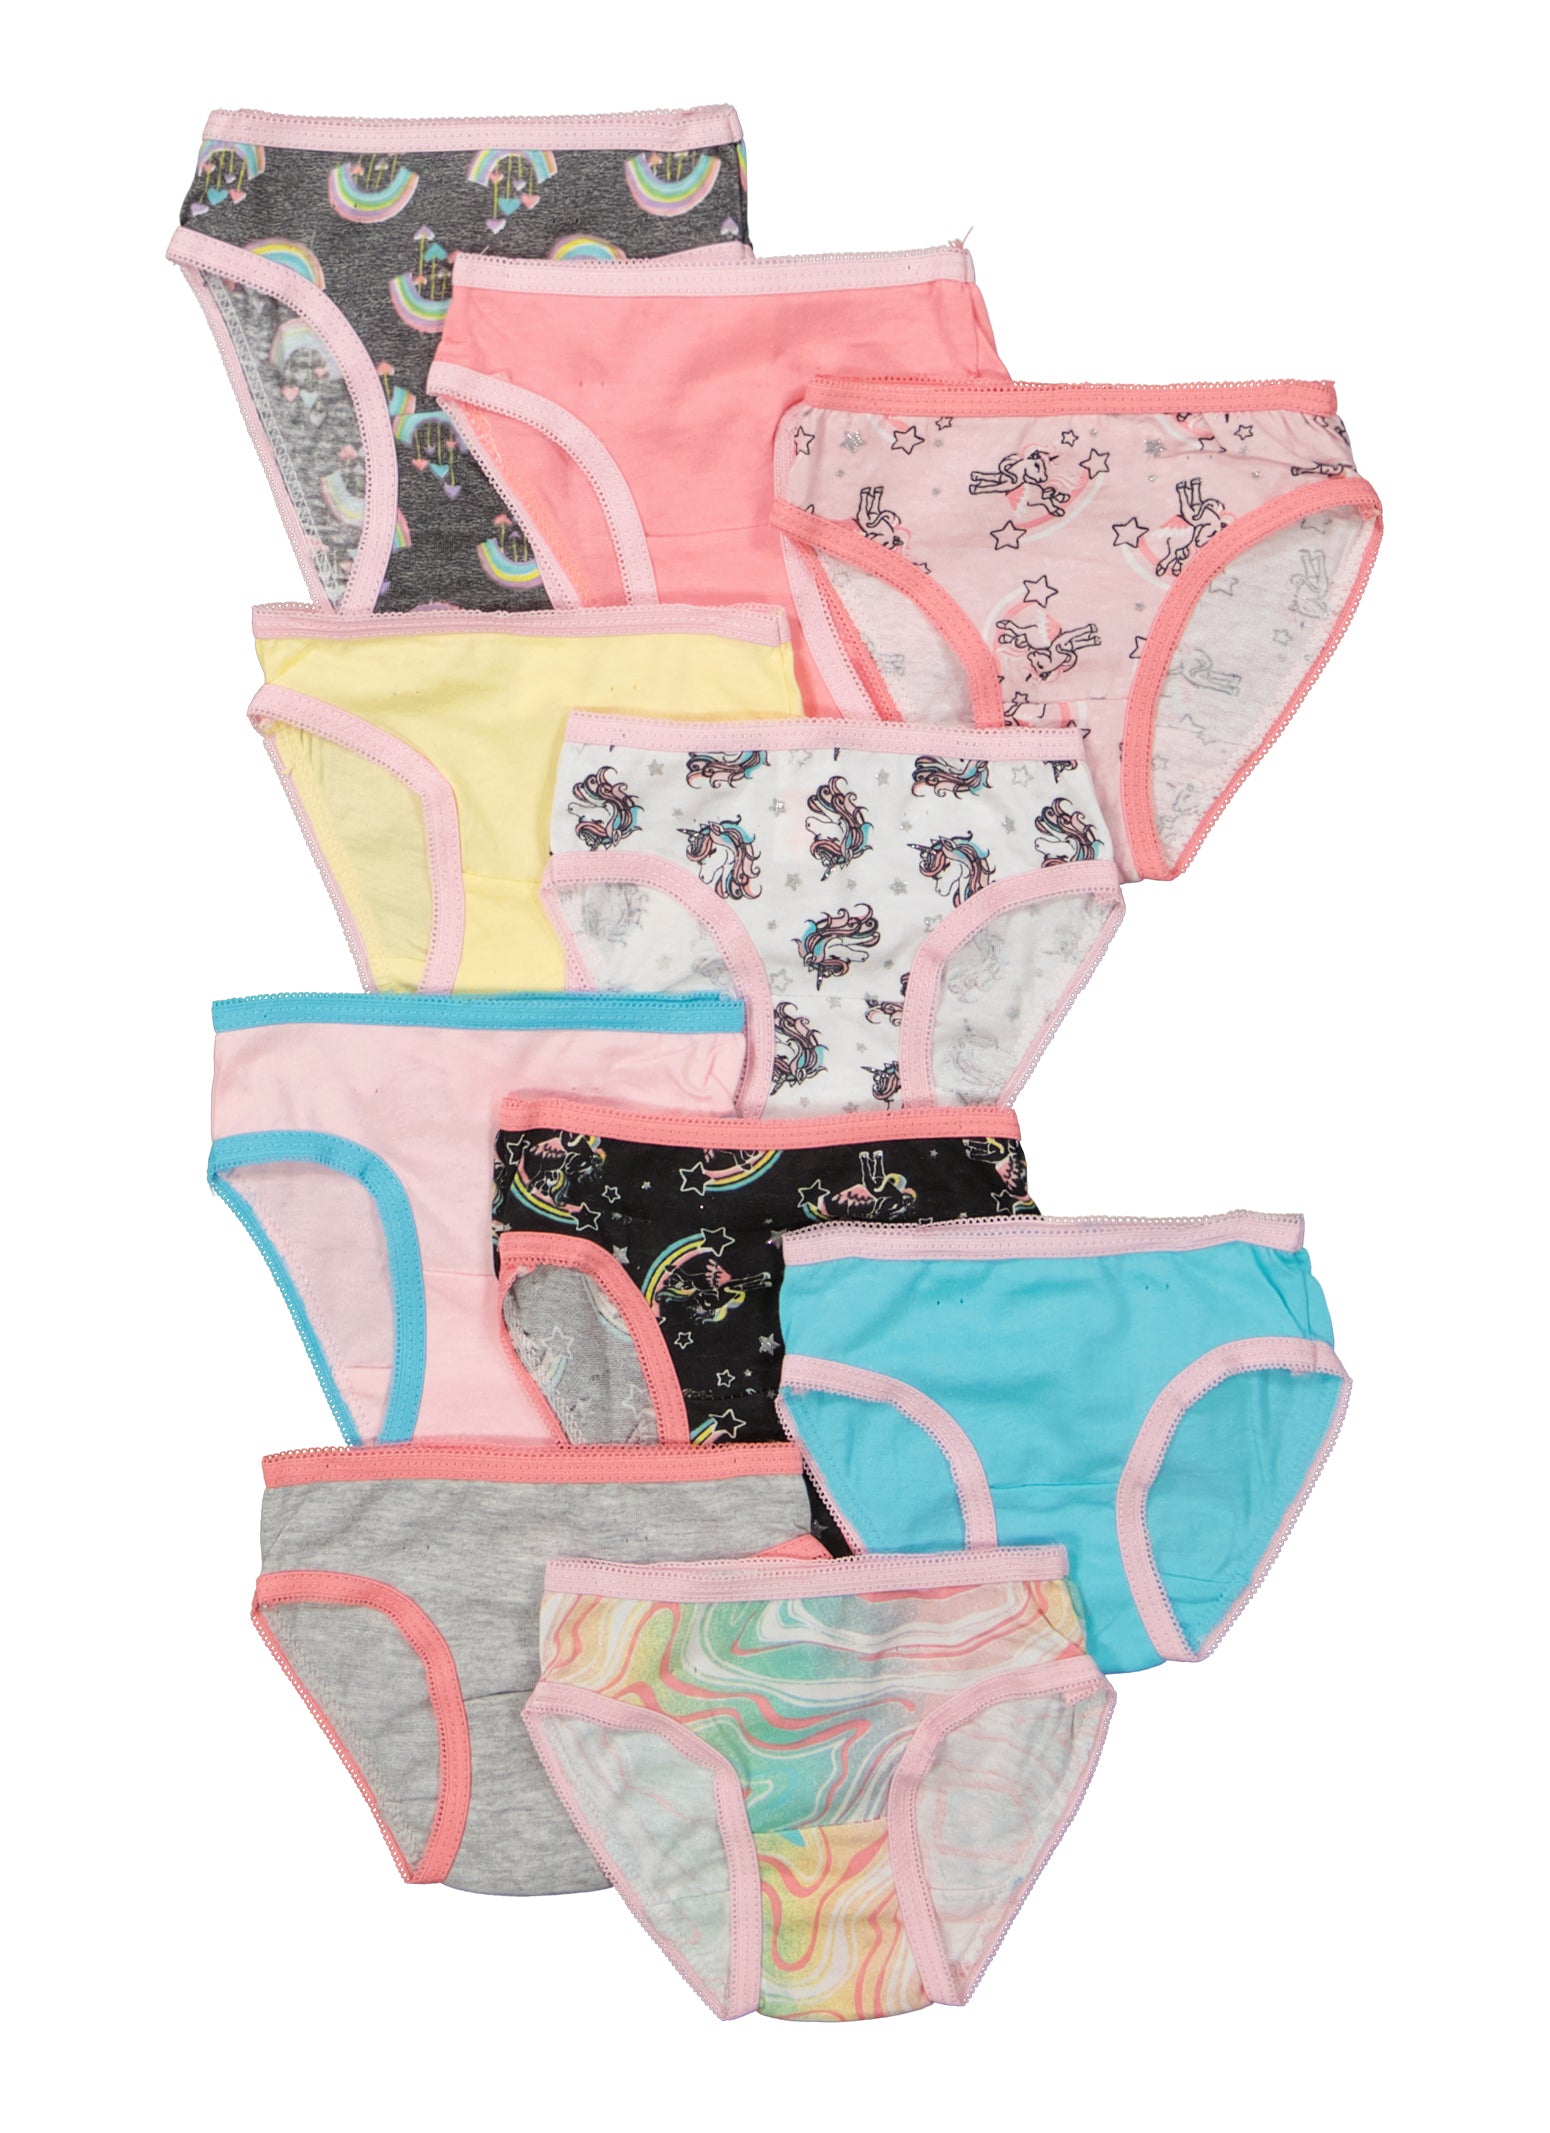 Toddler Girls Contrast Trim Patterned Panties 10 Pack, Multi, Size 3T